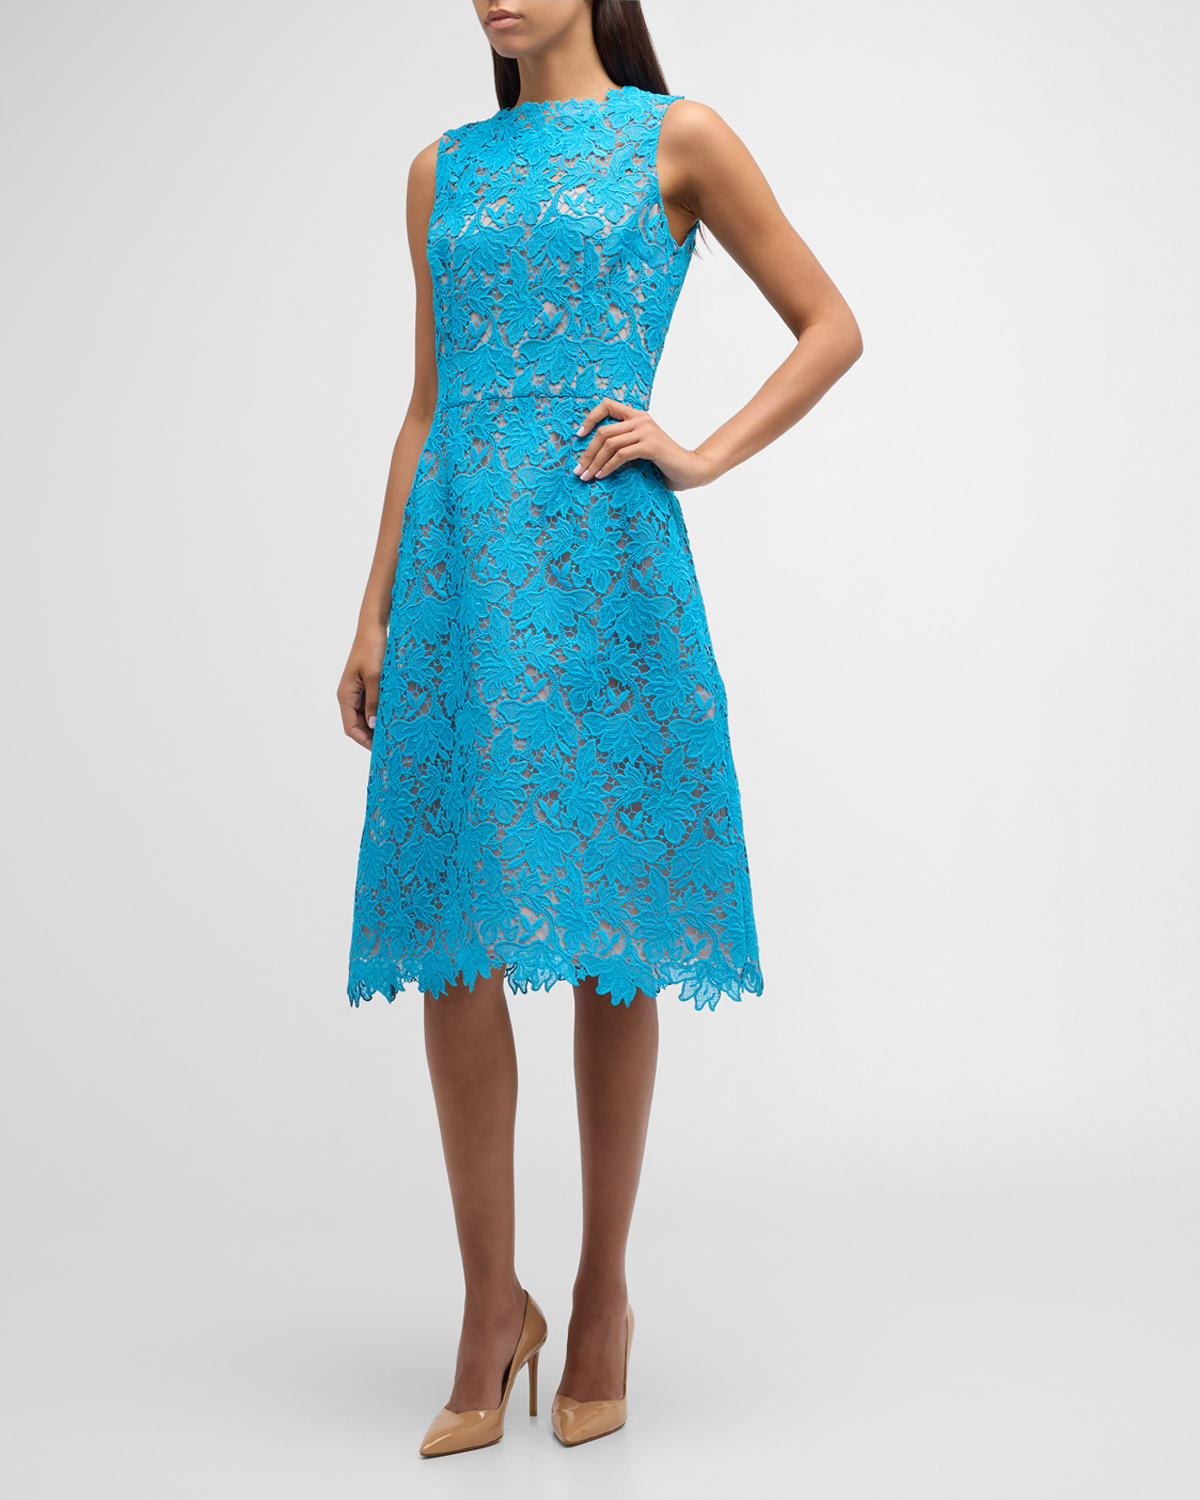 Rickie Freeman For Teri Jon Sleeveless Floral Lace Fit-&-flare Midi Dress In Turquoise